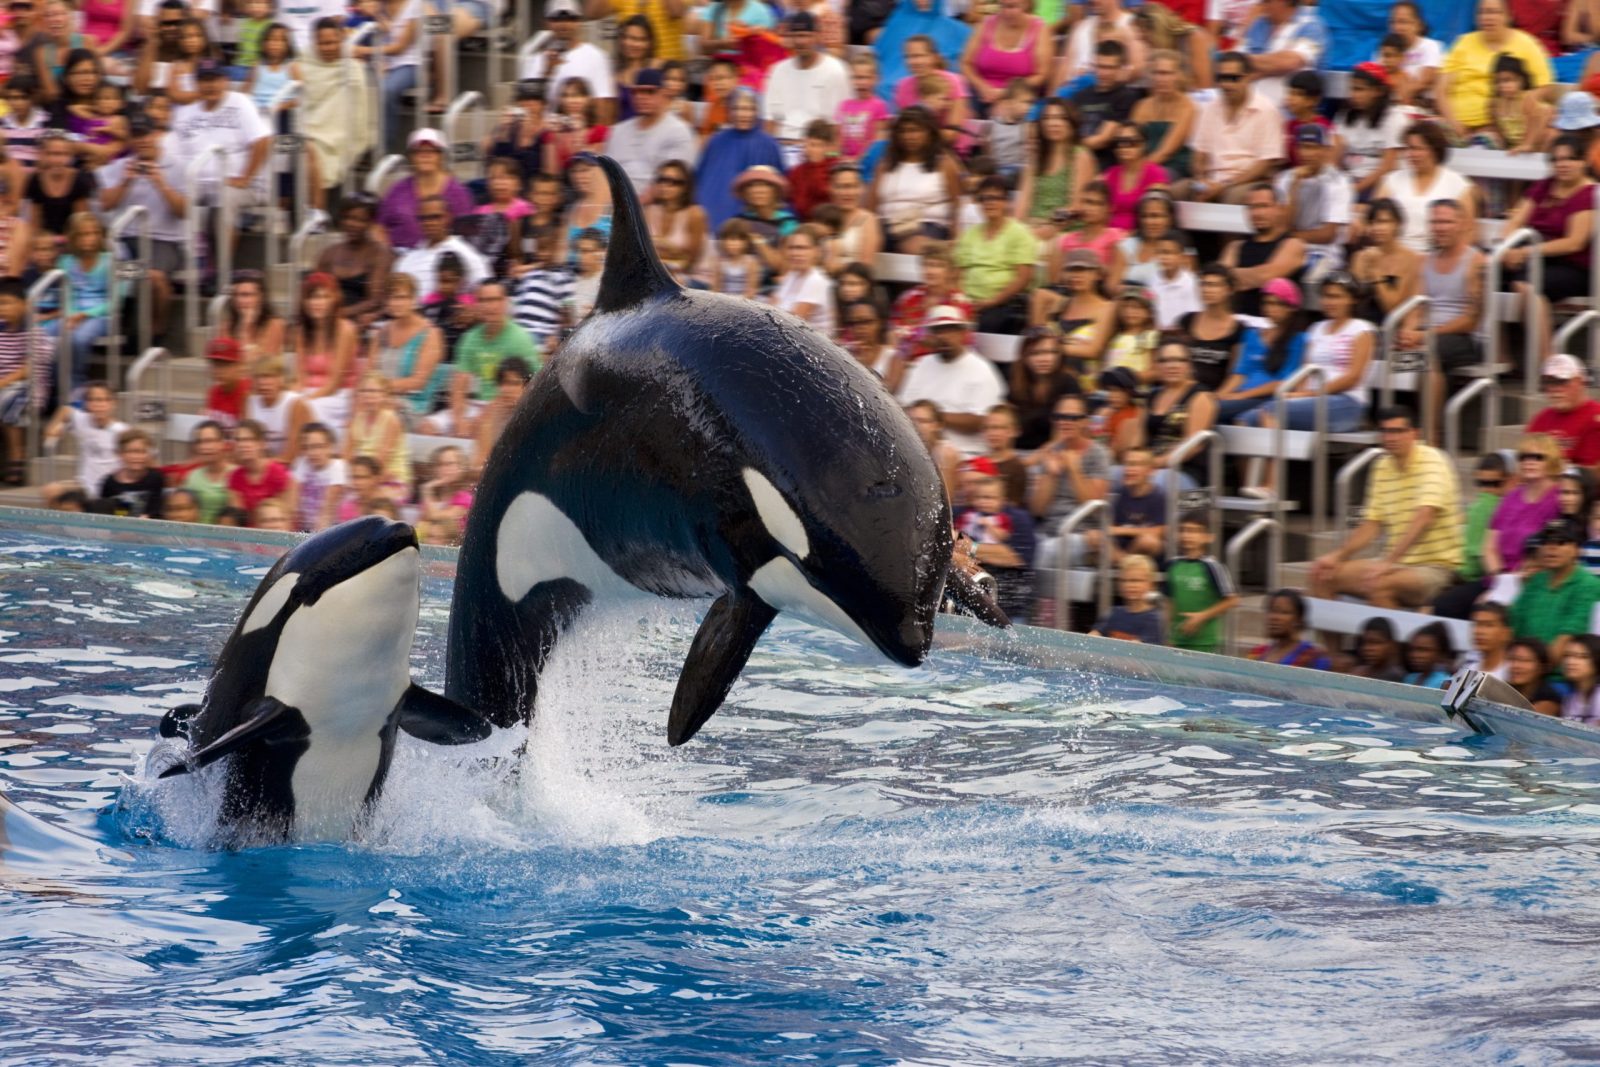 Three Captive Orcas Violently Attack Each Other at SeaWorld Just One Day After Orca Nakai Died